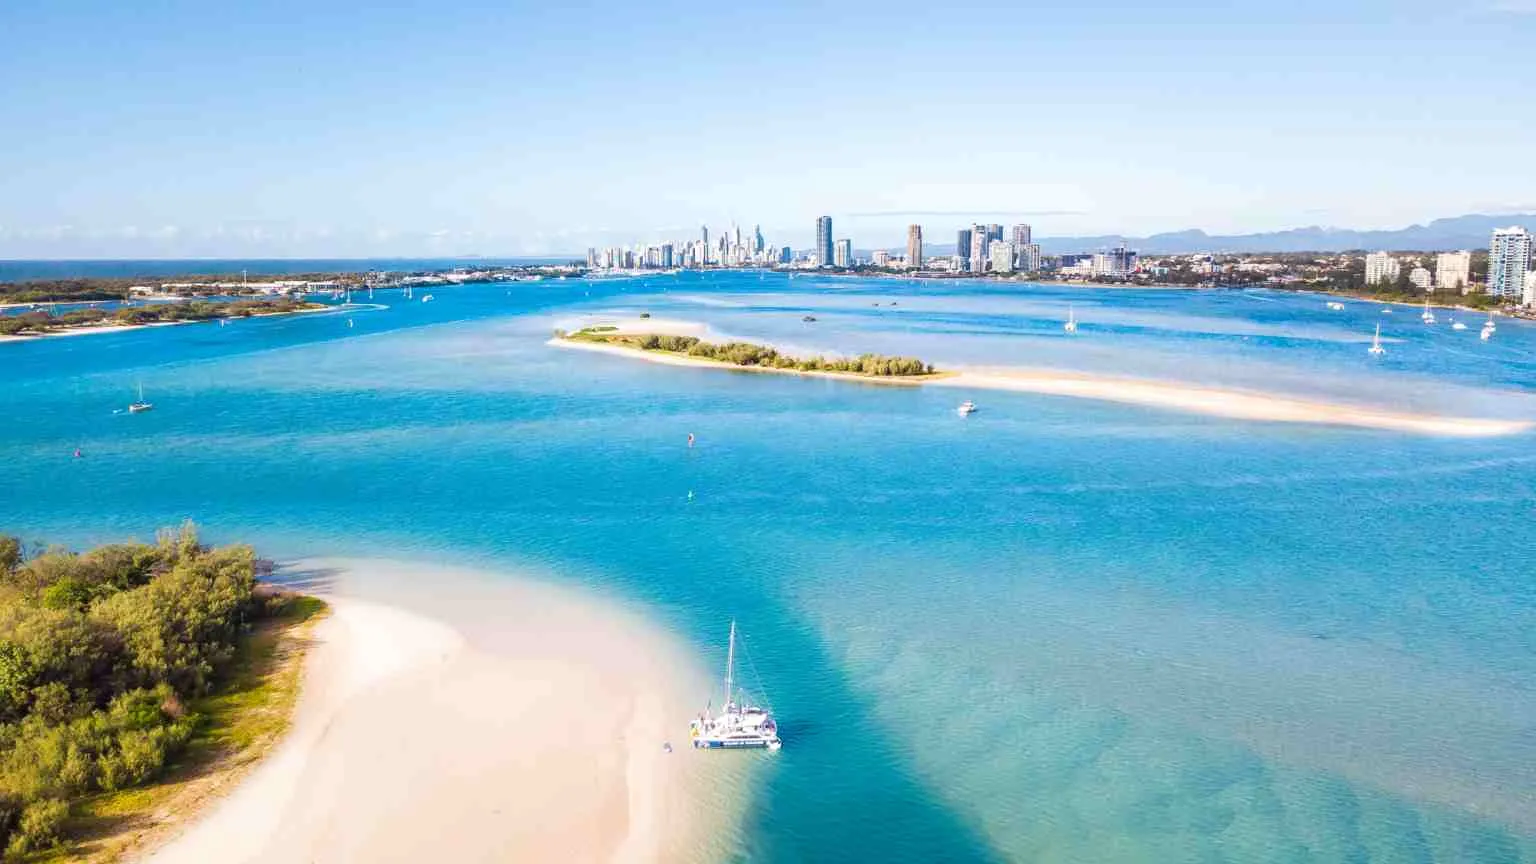 Best places to visit in Gold Coast: Tourist attractions and day trips